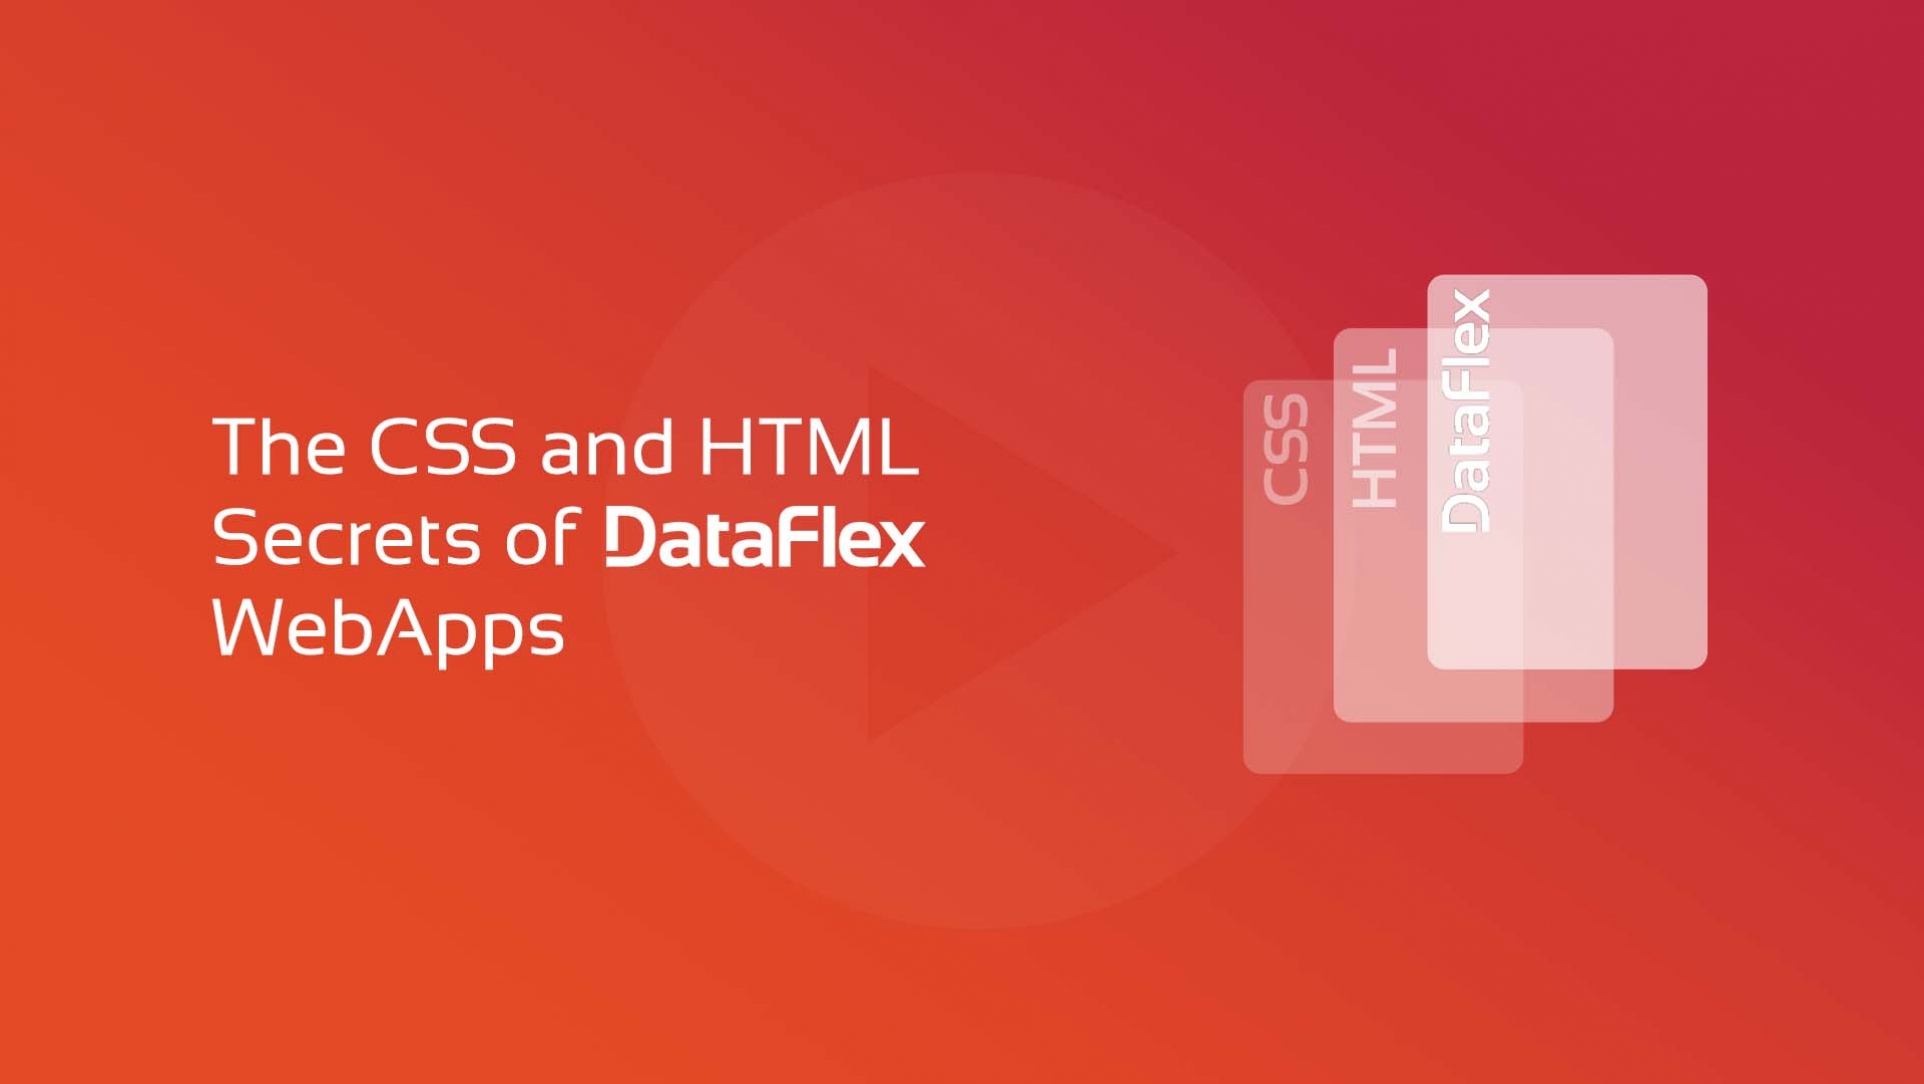 Learn the CSS and HTML Secrets of DataFlex WebApps!